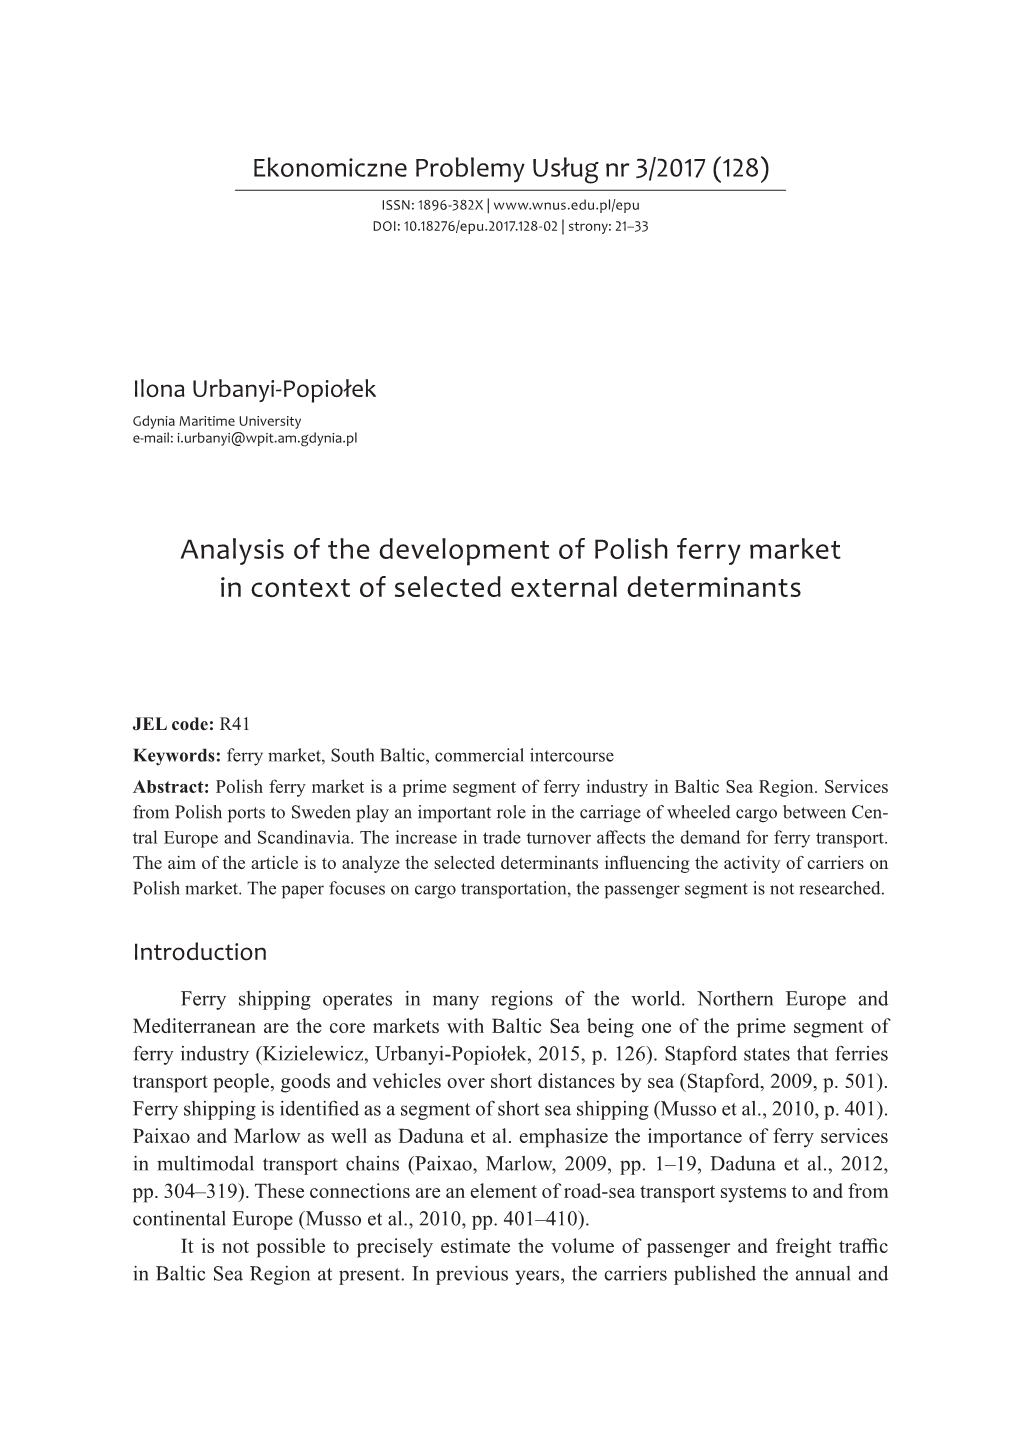 Analysis of the Development of Polish Ferry Market in Context of Selected External Determinants